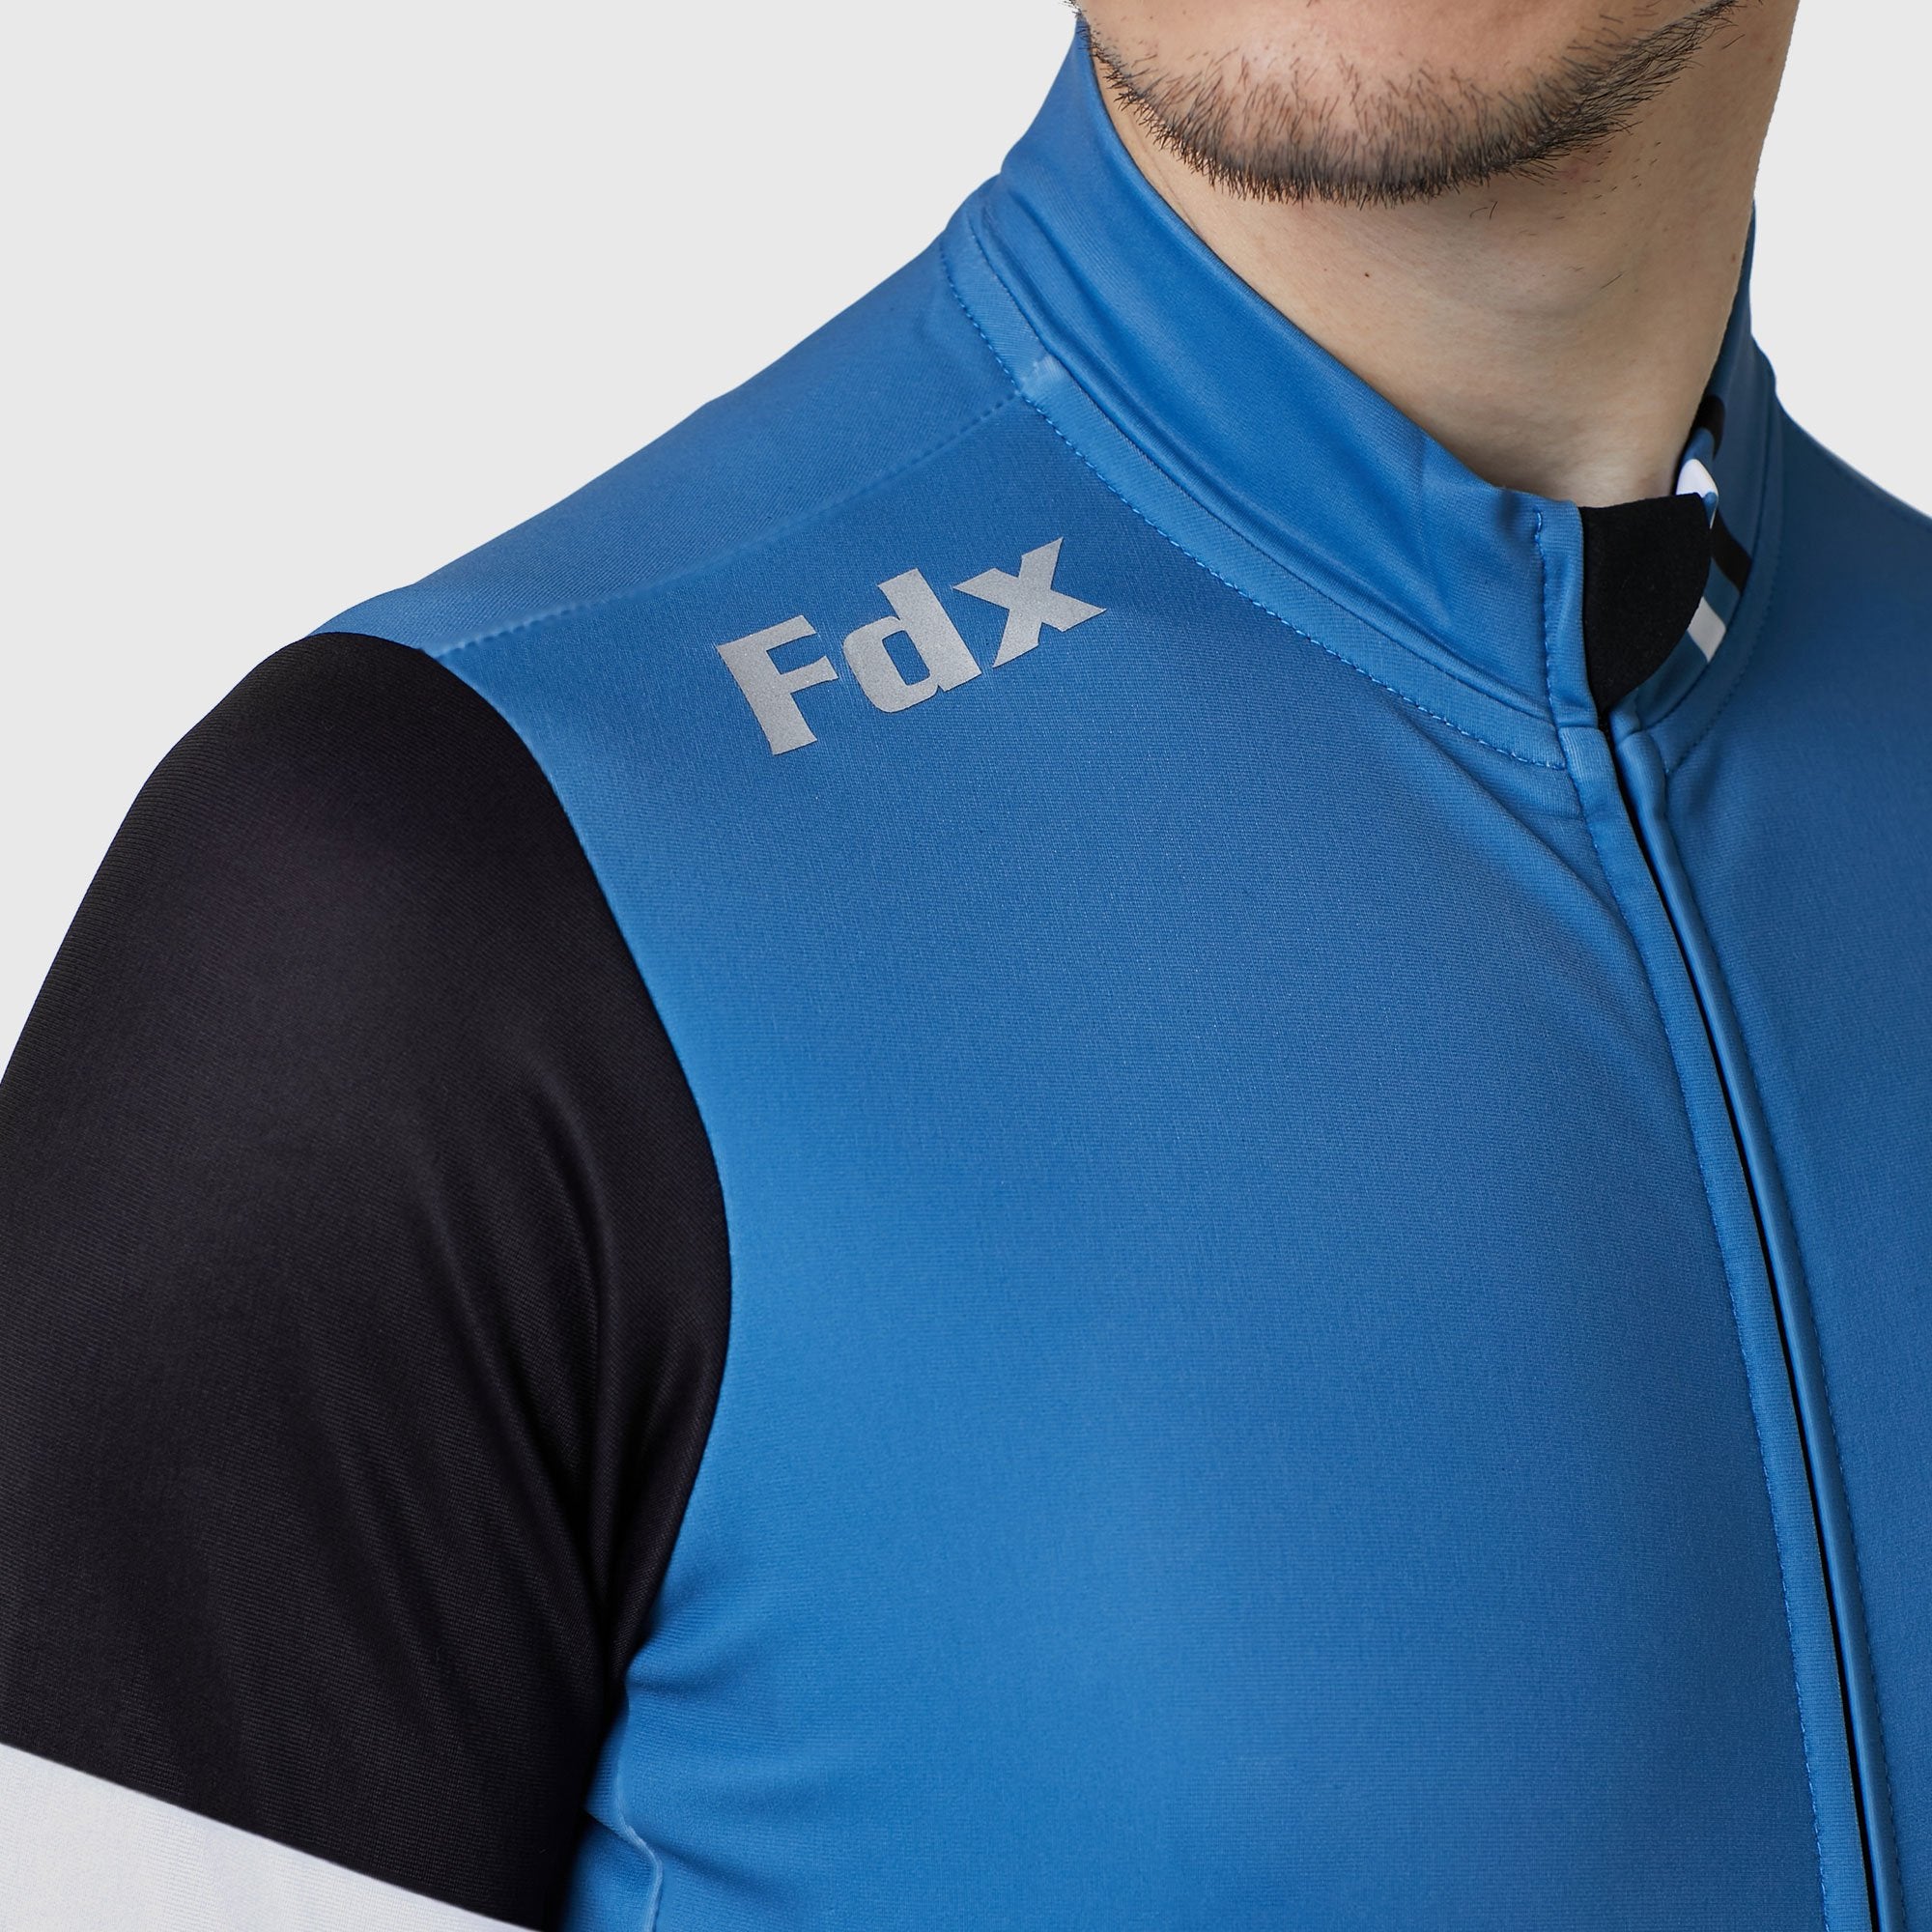 Fdx Limited Edition US Jersey FDX Long - Sports Blue Thermal | Sports® Men\'s FDX Cycling Sleeve